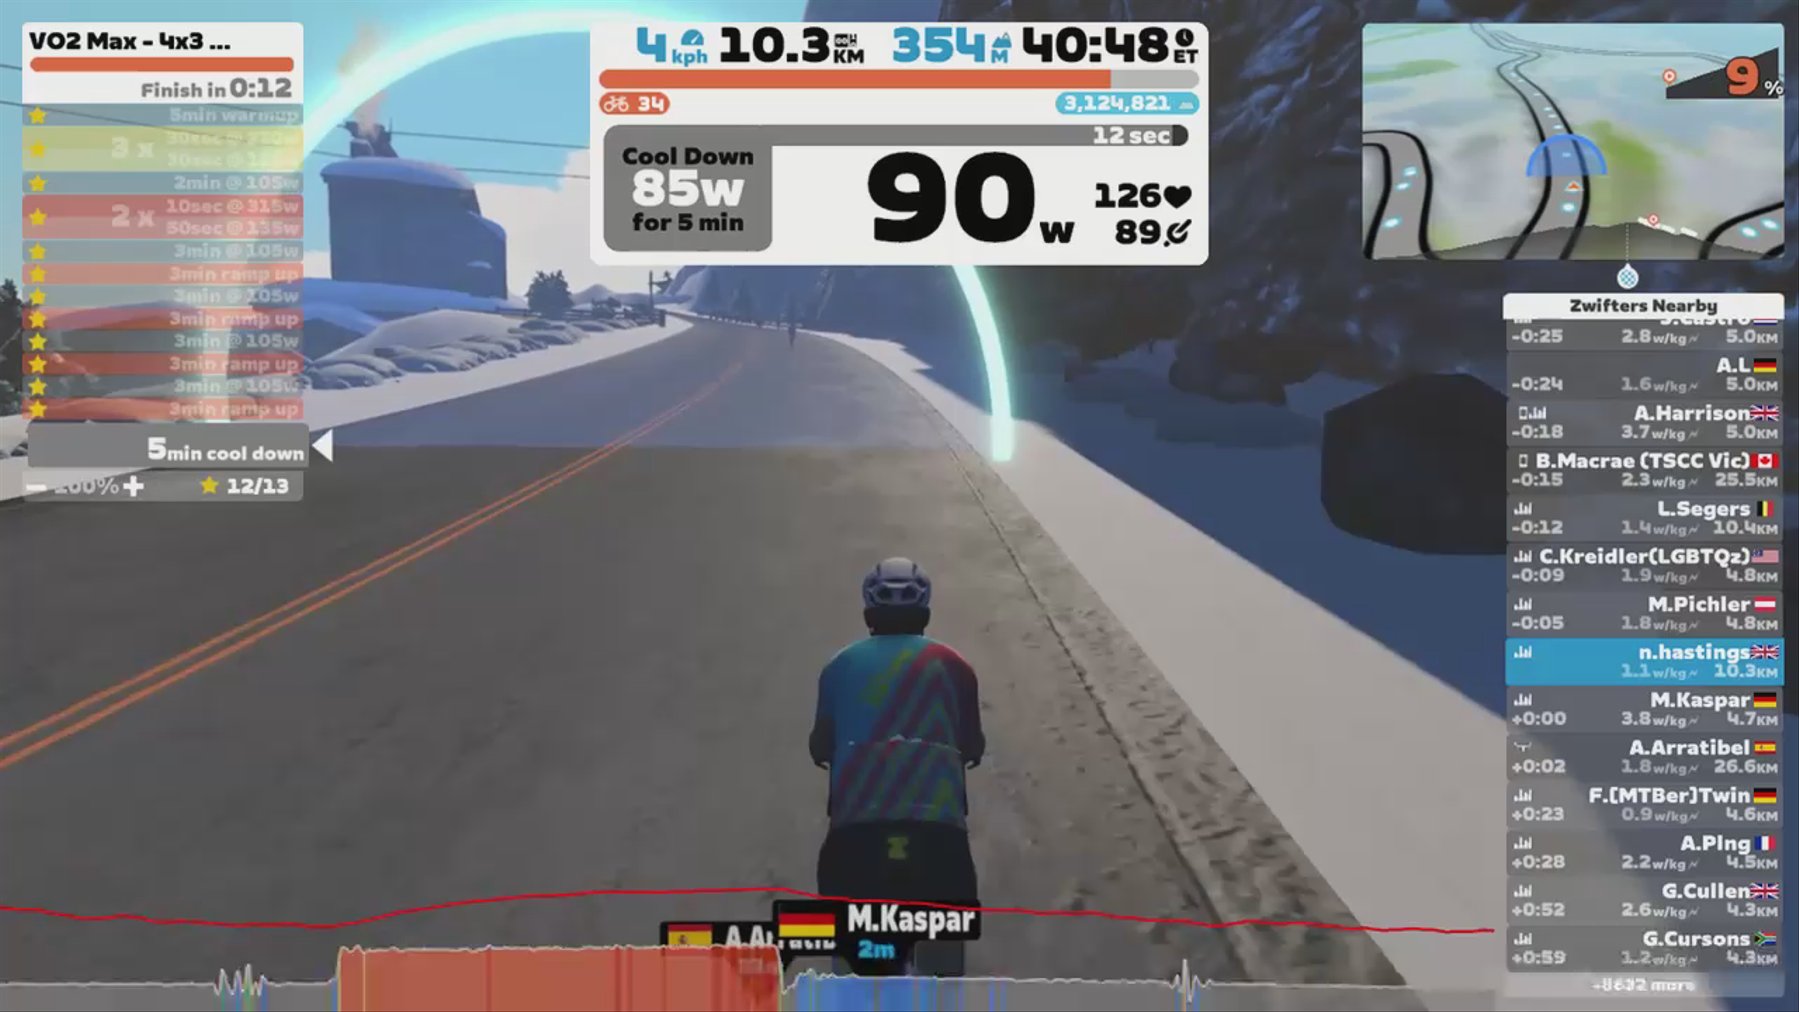 Zwift - VO2 Max - 4x3 Ramps in Watopia